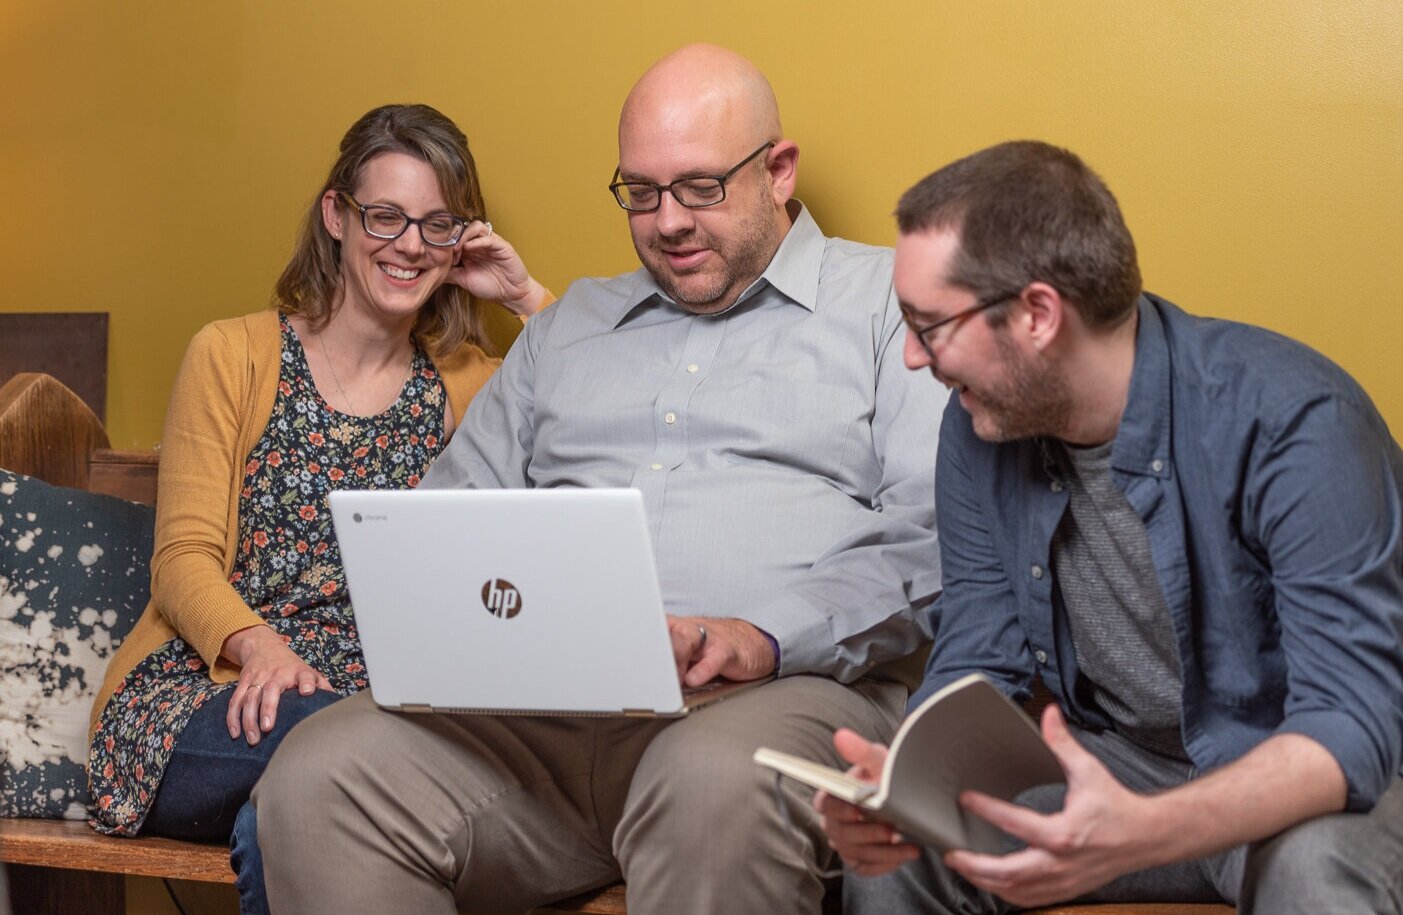 Lori, Chris, and Jarred are co-owners of the 9-person 1909 DIGITAL team. [ALT TEXT: A woman and two men, named Lori, Chris, and Jarred, sit on a couch in front of a yellow wall, smiling and looking at the same laptop being held by the man sitting in the middle.]